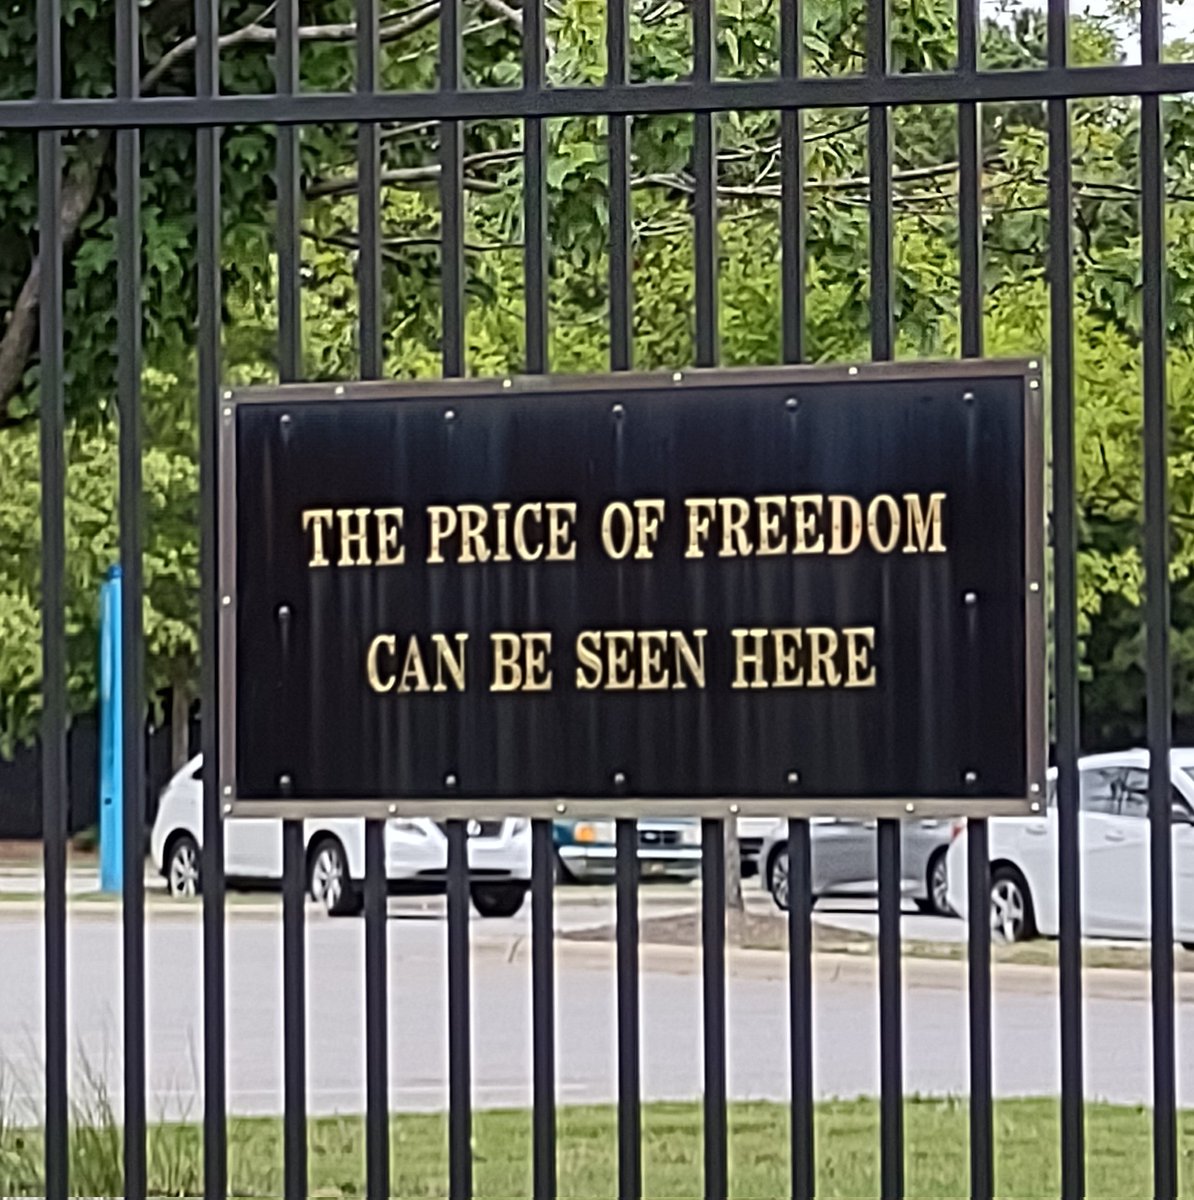 Posted at the entrance of the Greenville NC VA Clinic...
#Salute 
#SupportOurVeterans